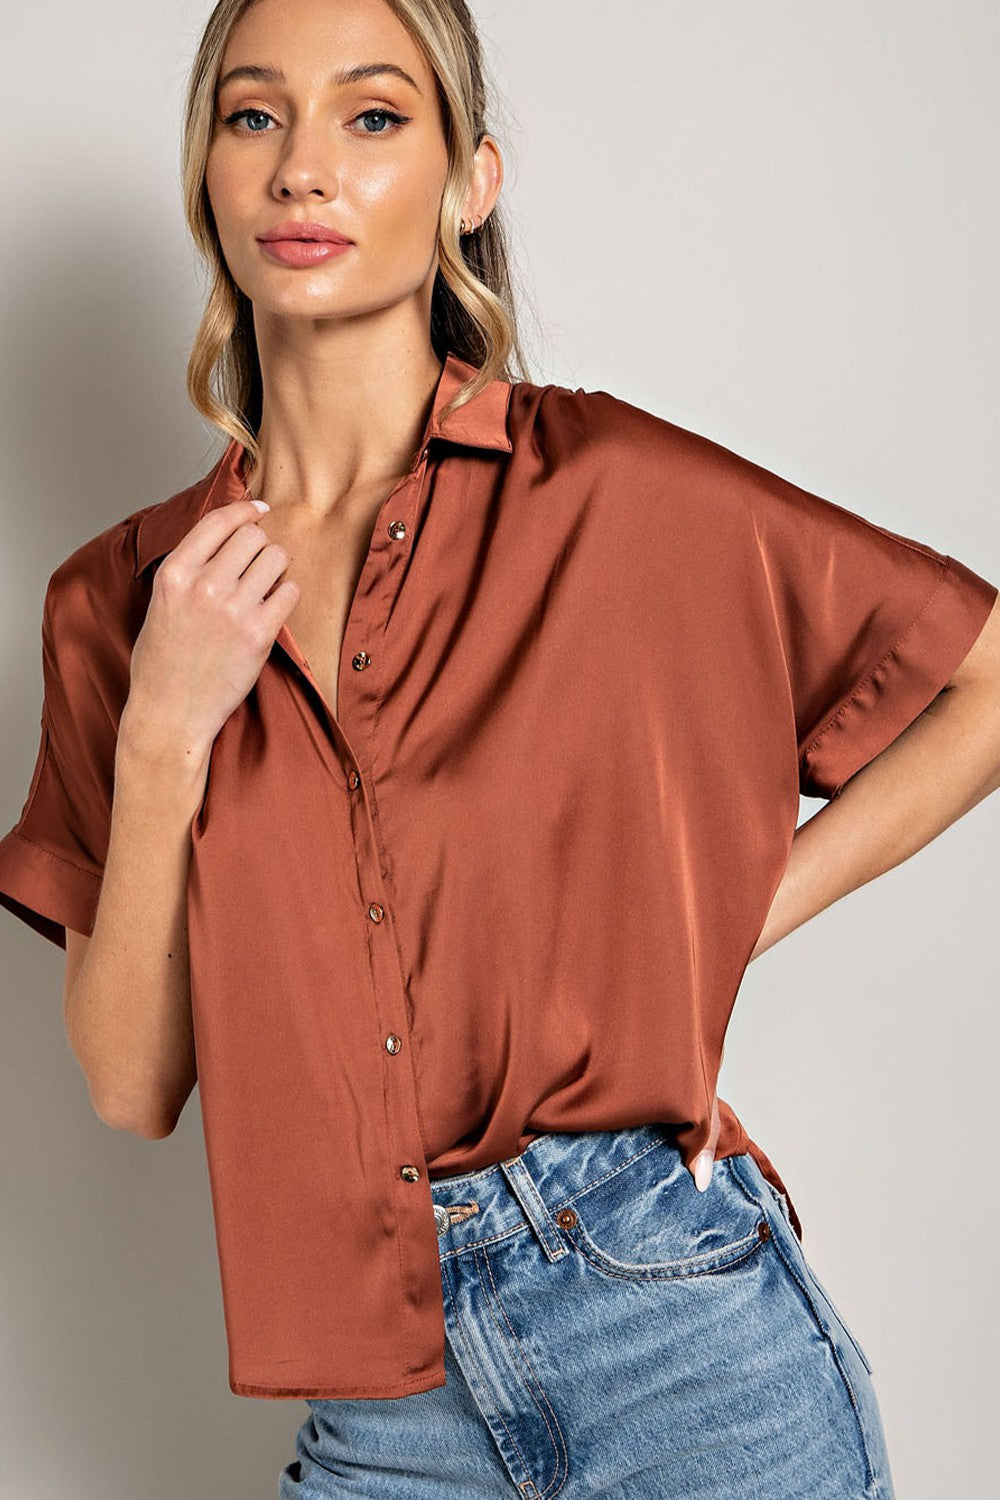 Better Things To Do Short Sleeve Button Down Top - Coco